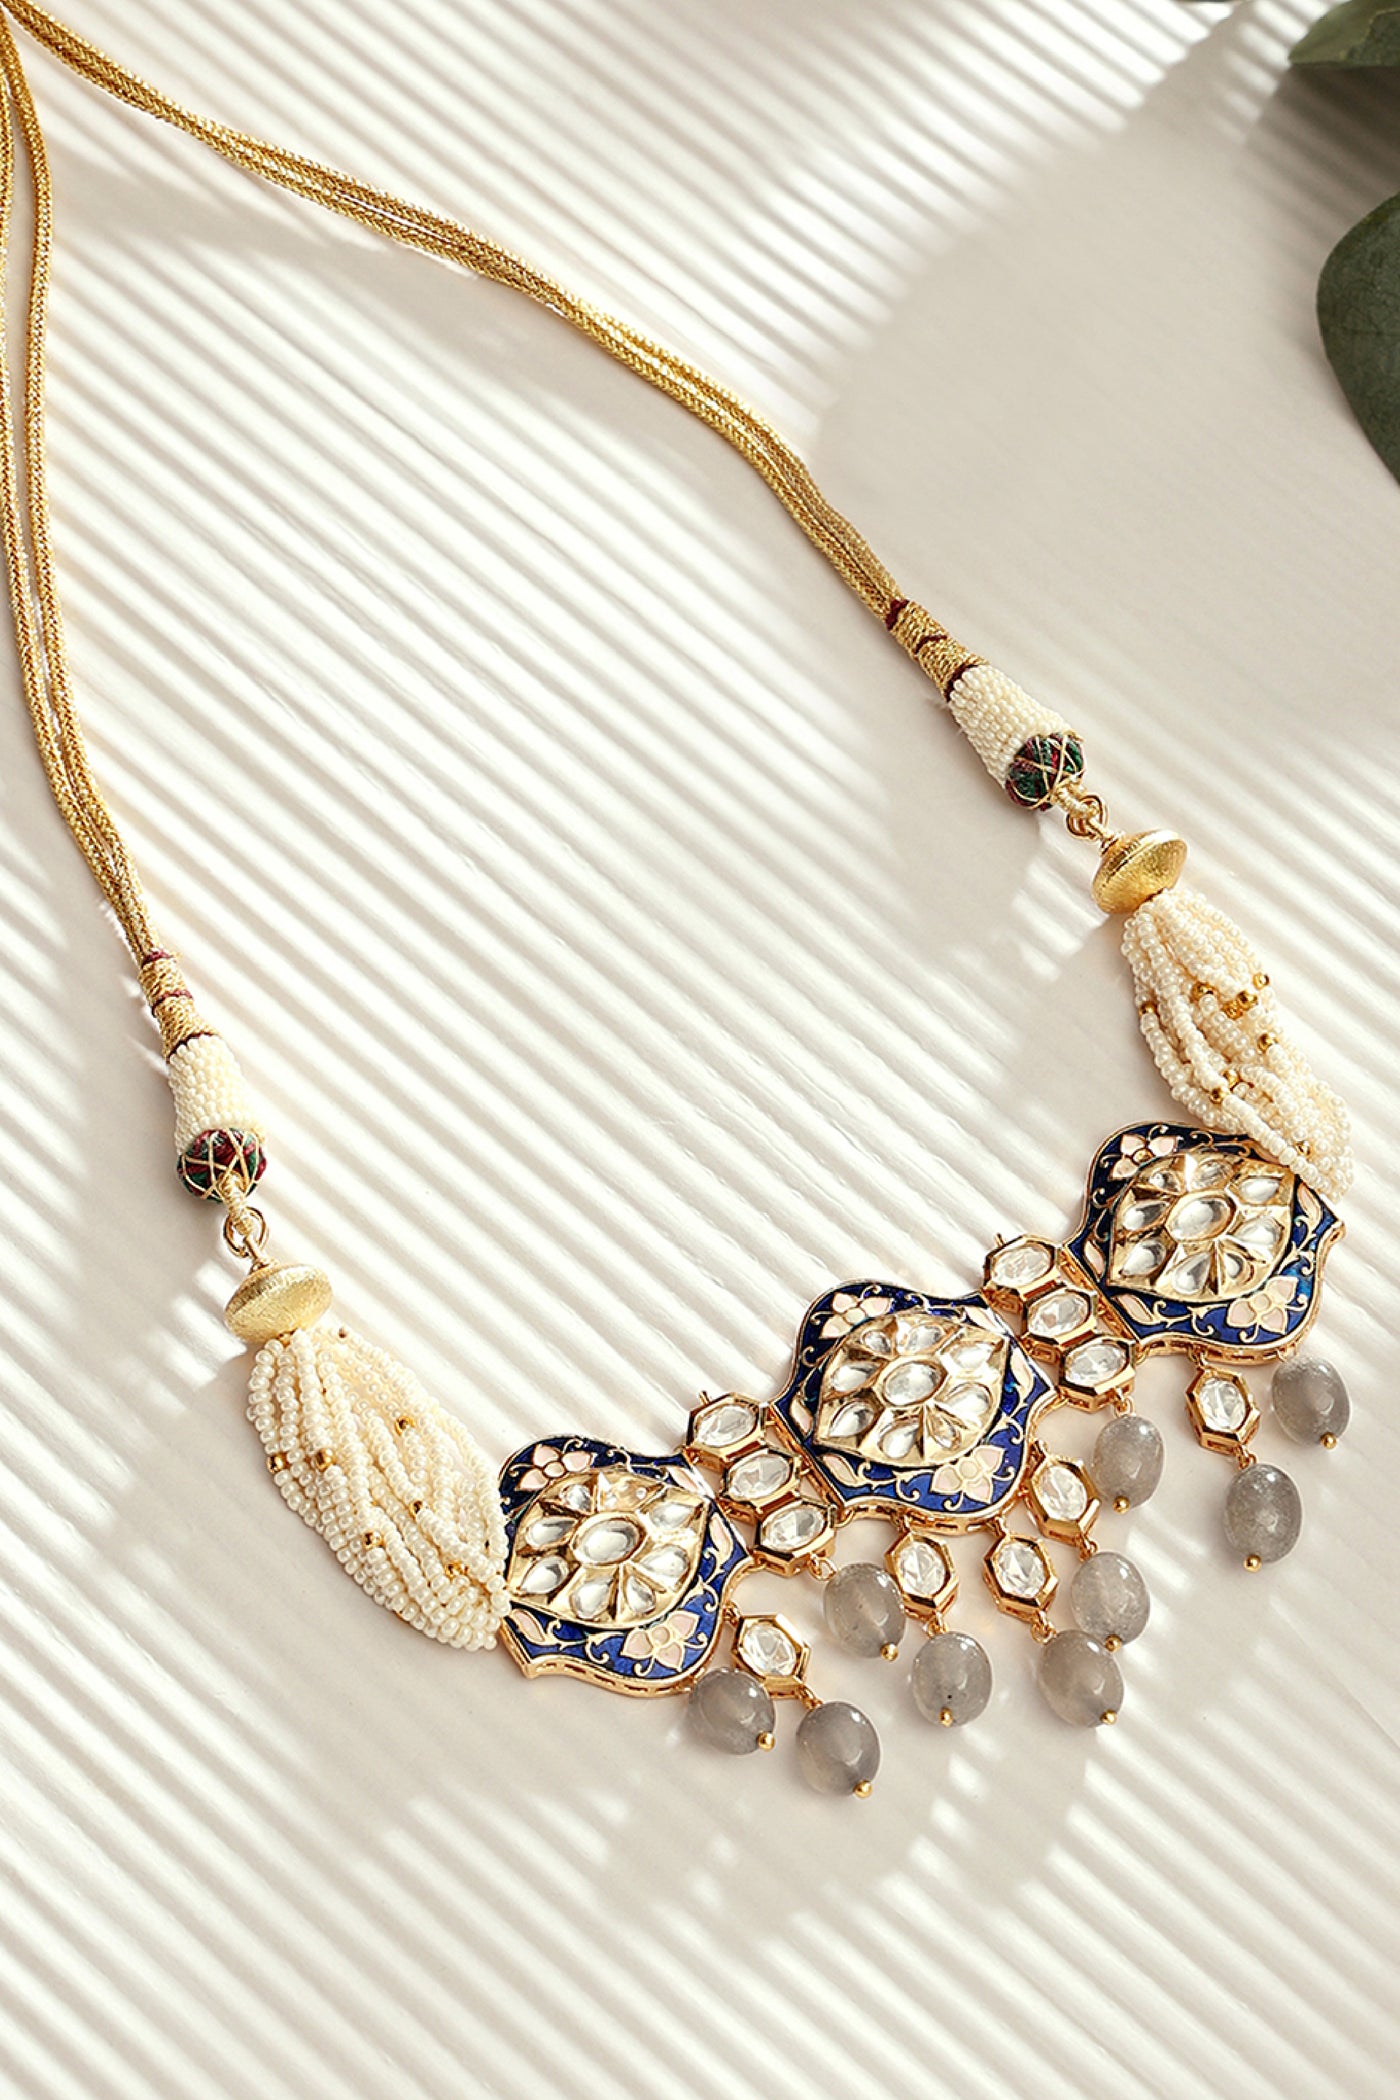 Joules by Radhika Royal Blue With Pearl Polki Necklace jewellery indian designer wear online shopping melange singapore